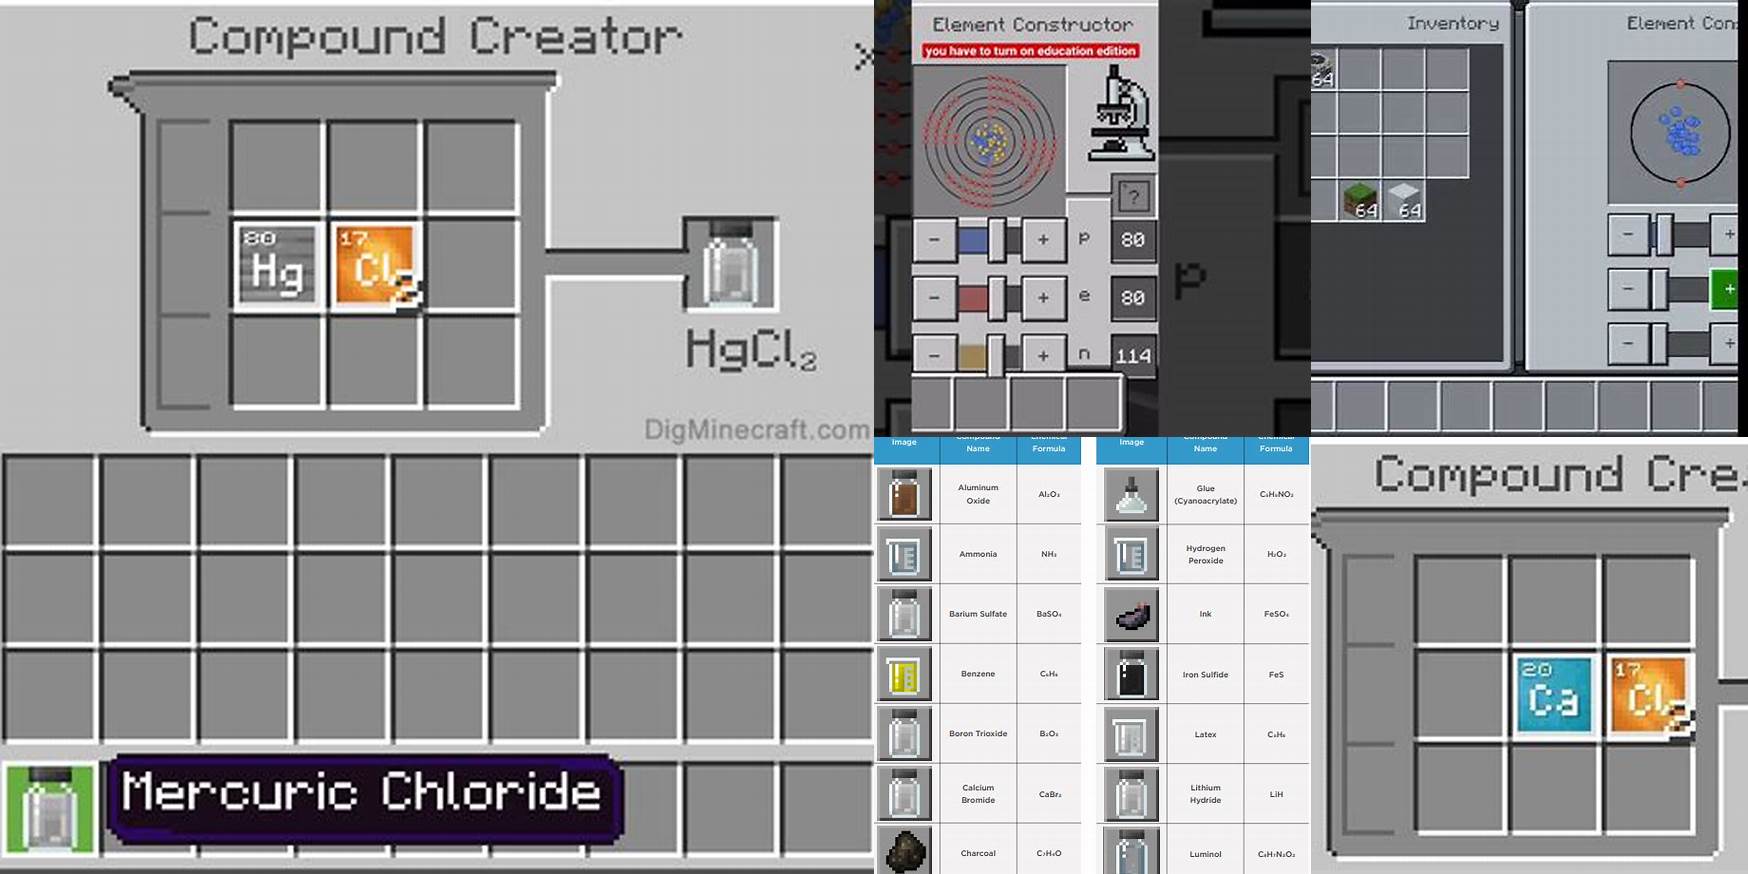 How To Make Mercuric Chloride In Minecraft Education Edition